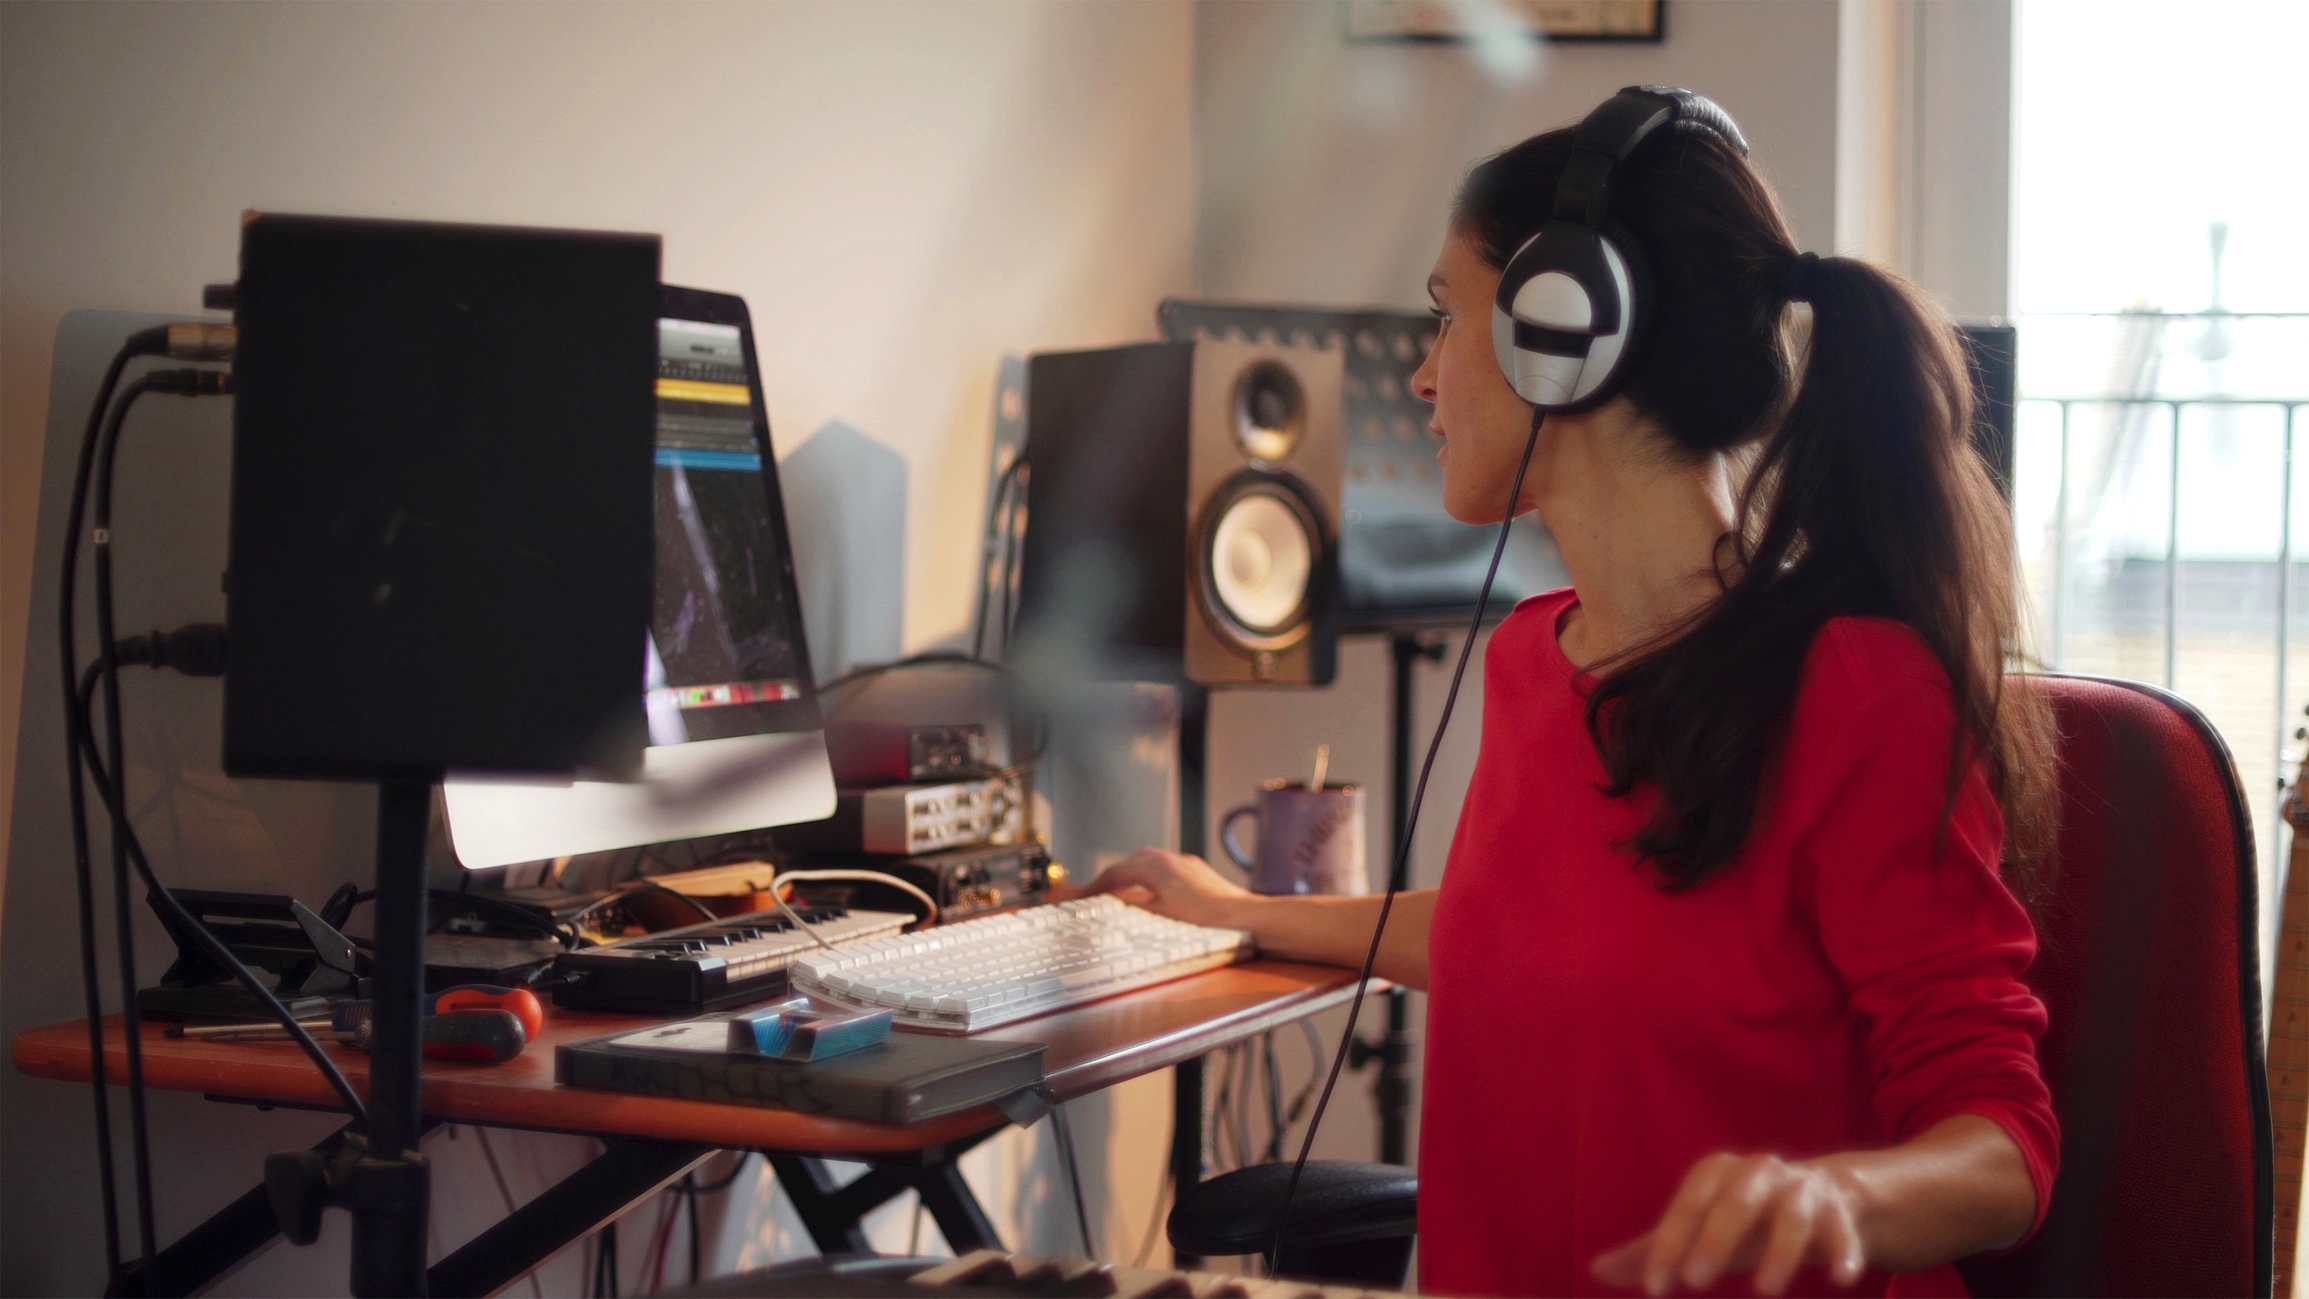 A good looking Hispanic woman is composing music in her private home studio. She is using a computer &amp; music keyboard to compose and is surrounded by musicians’ equipment.